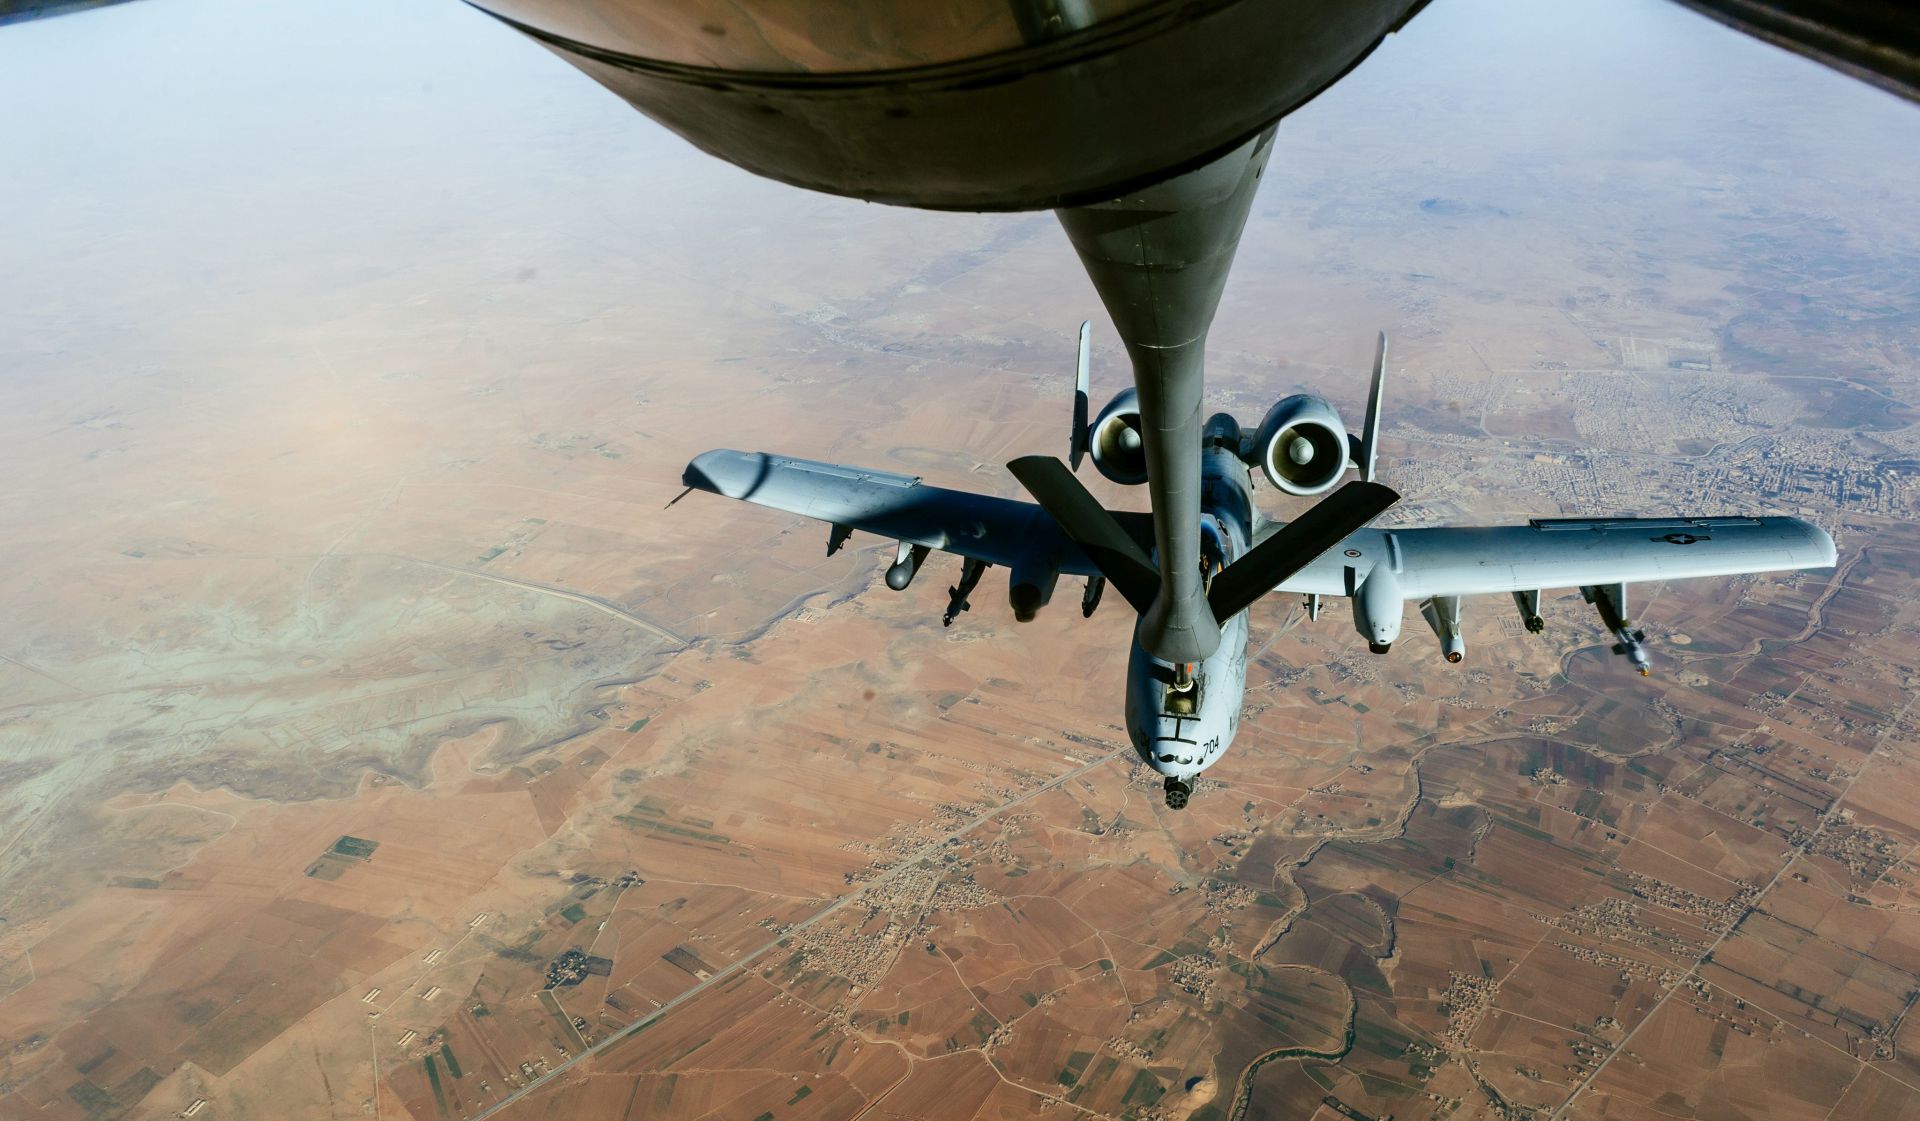 epa05716451 A handout photo made available by the US Department of Defense shows a US Air Force A-10 Thunderbolt II aircraft refuelling from a 340th Expeditionary Air Refueling Squadron KC-135 Stratotanker over Iraq, 11 January 2017 (issued 14 January 2017). US armed forces are currently fighting against Islamic State (IS, or ISIS) militants in Iraq.  EPA/JORDAN CASTELAN / US DEPARTMENT OF DEFENSE HANDOUT Earon Brown, Capt., 379th PA, earon.brown@auab.afcent.af.mil HANDOUT EDITORIAL USE ONLY